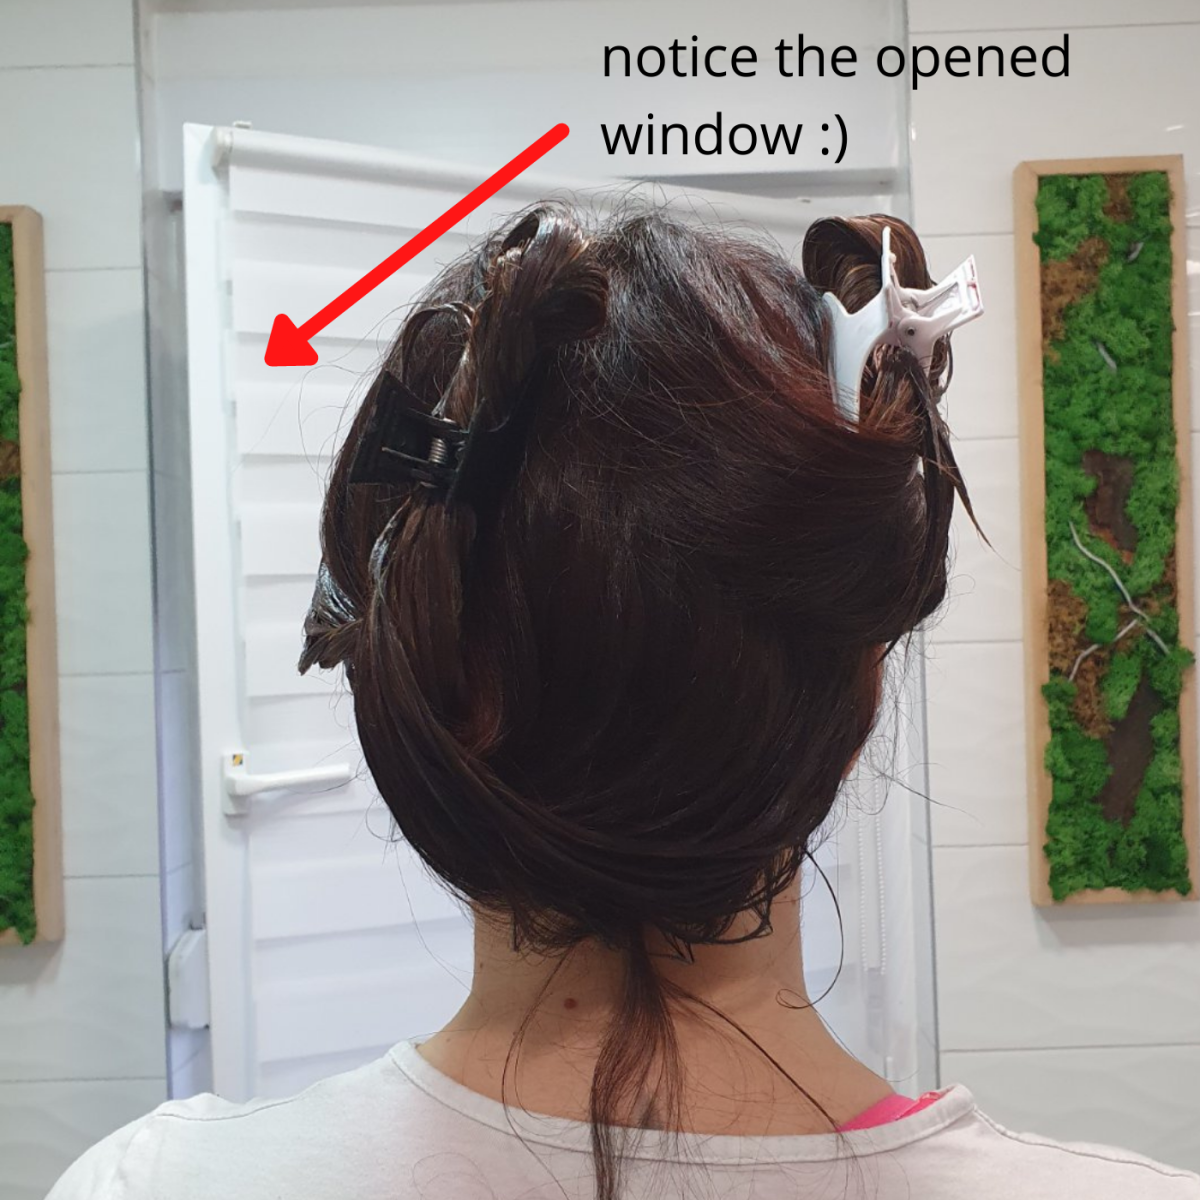 As I mentioned, I was very careful not to get the product on my scalp so perhaps I was even applying it too far from my roots. I see now that I even missed one little hair strand that was left hanging on the back :)